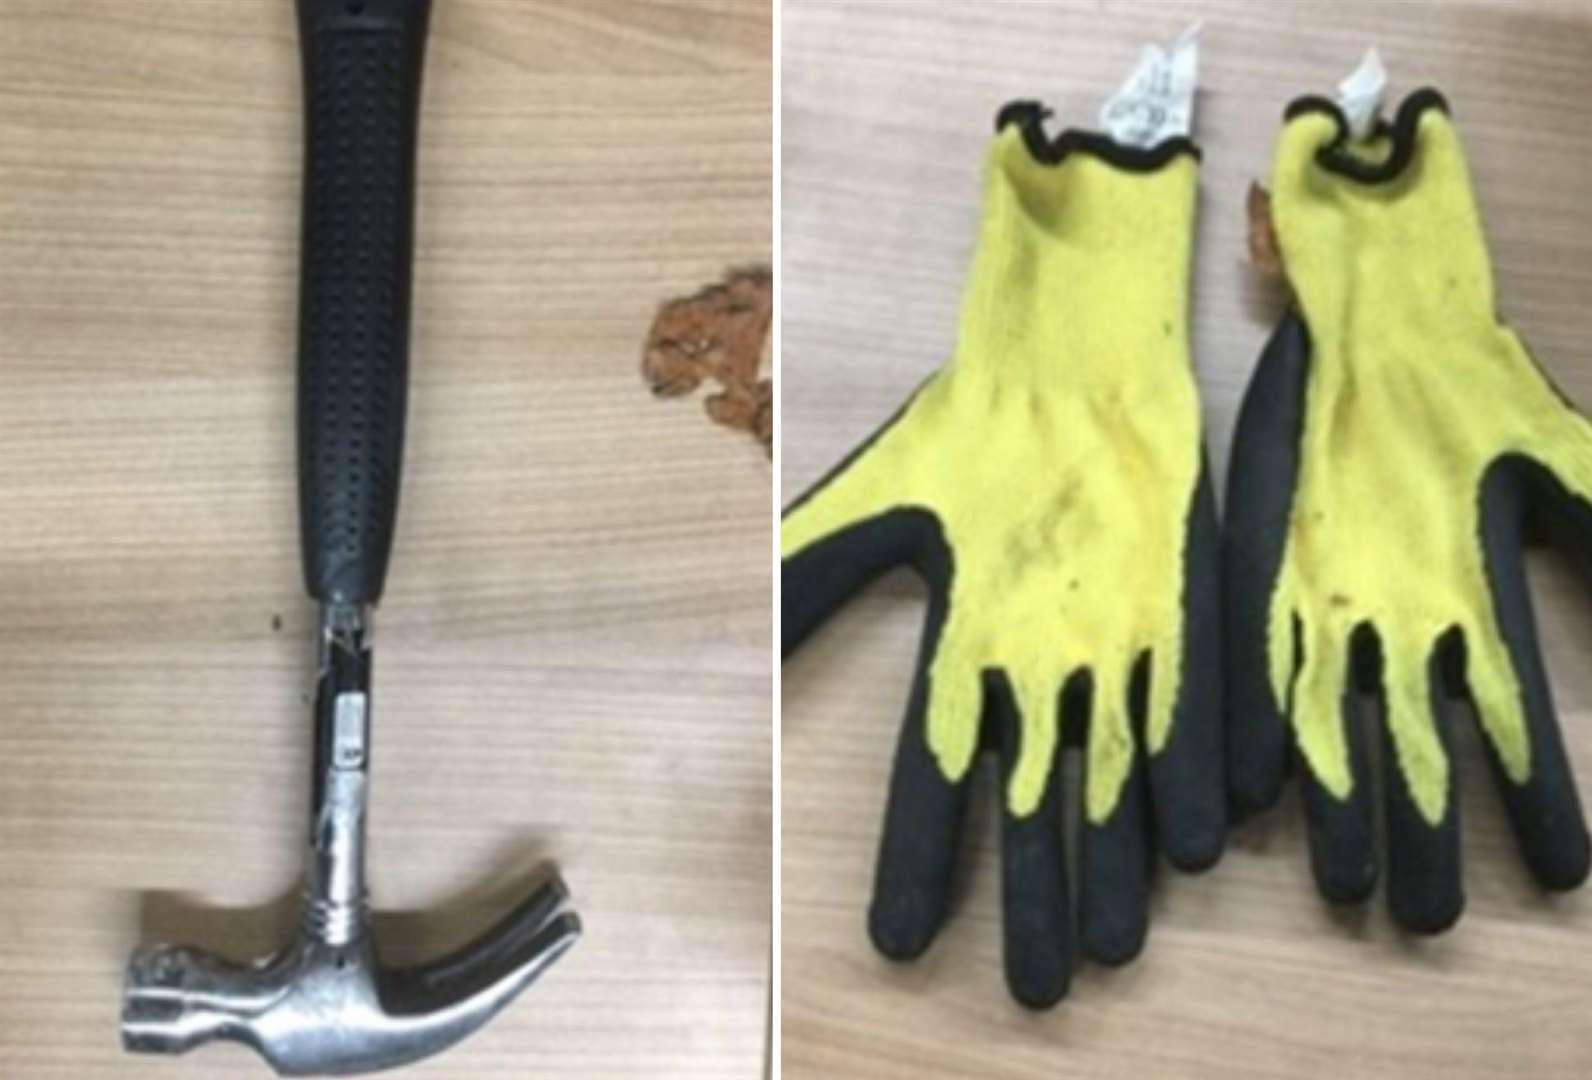 Mark Royden used gloves and a hammer during the raid